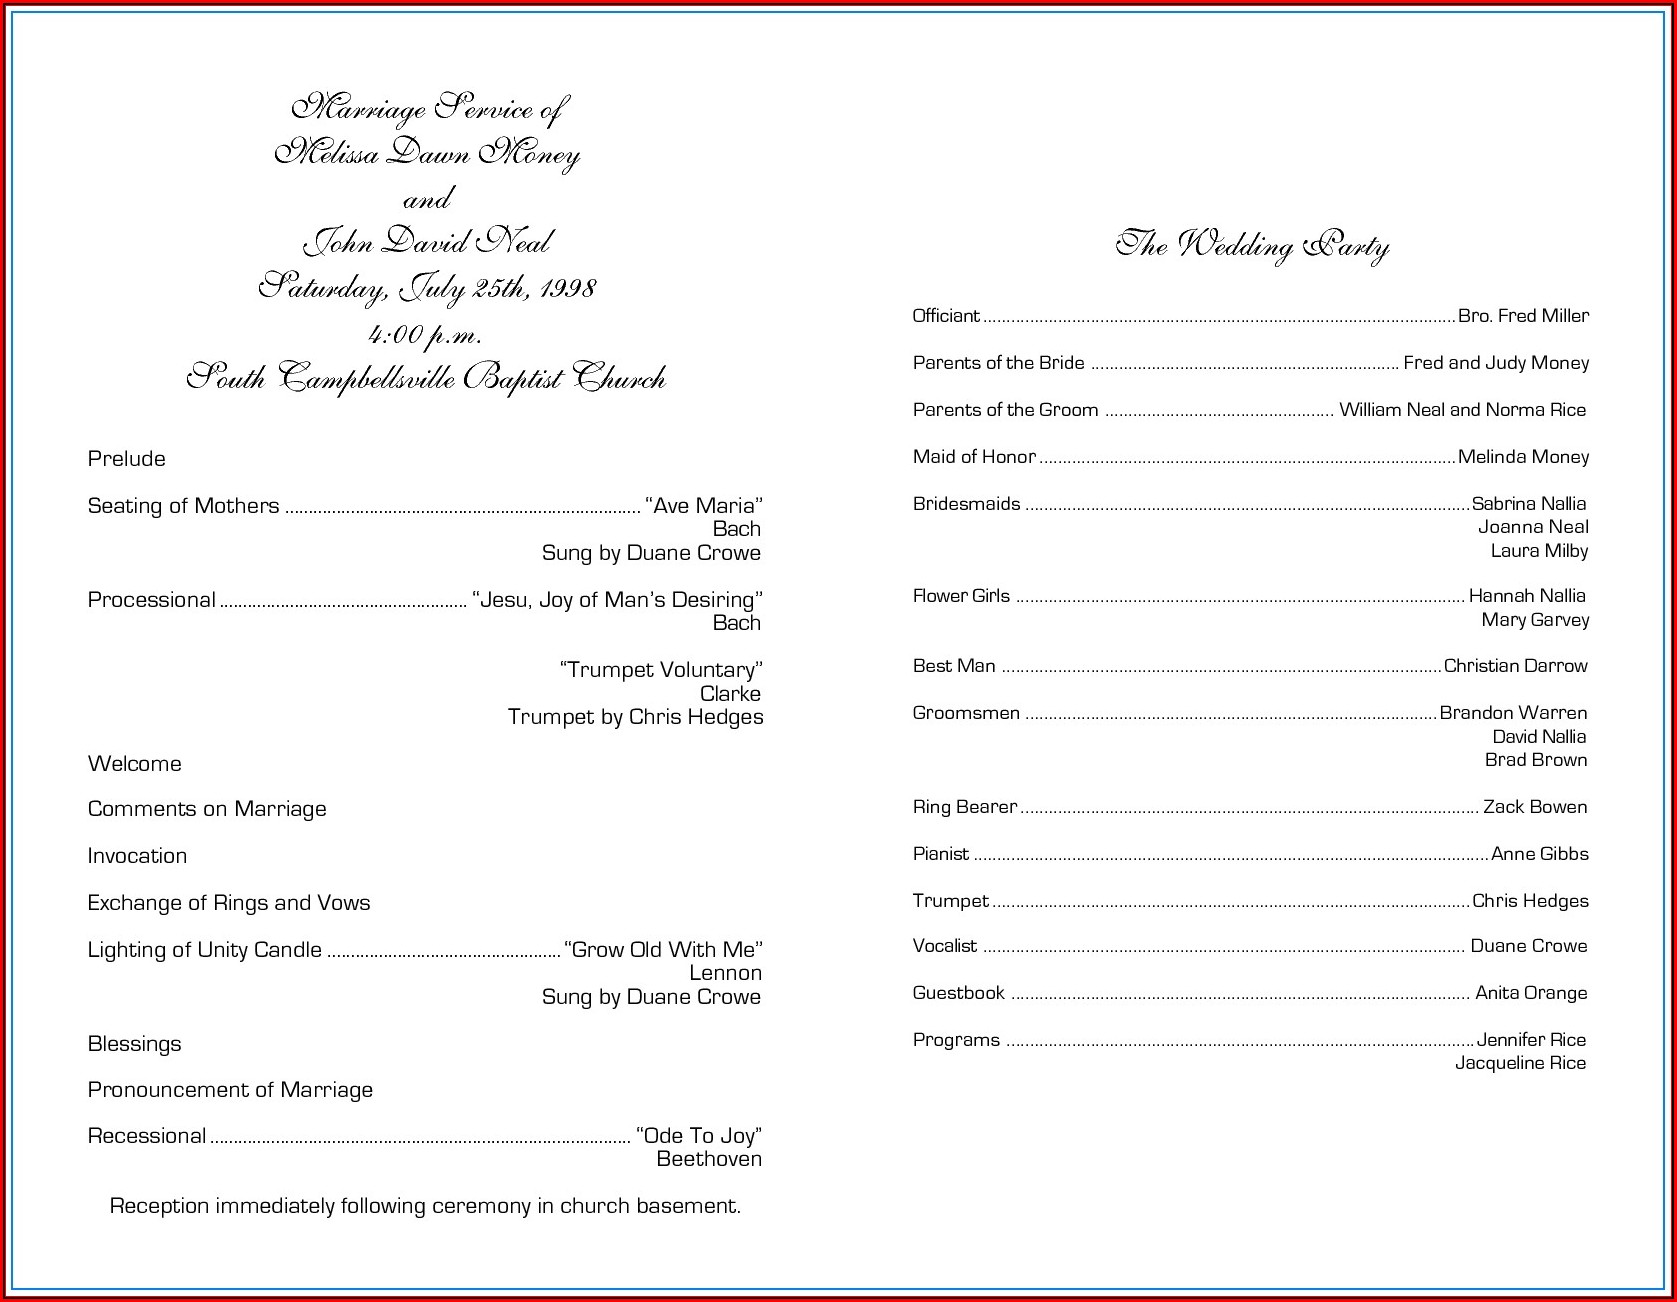 Free Catholic Wedding Program Template Without Mass Template 1 Resume Examples kLYrOw1V6a